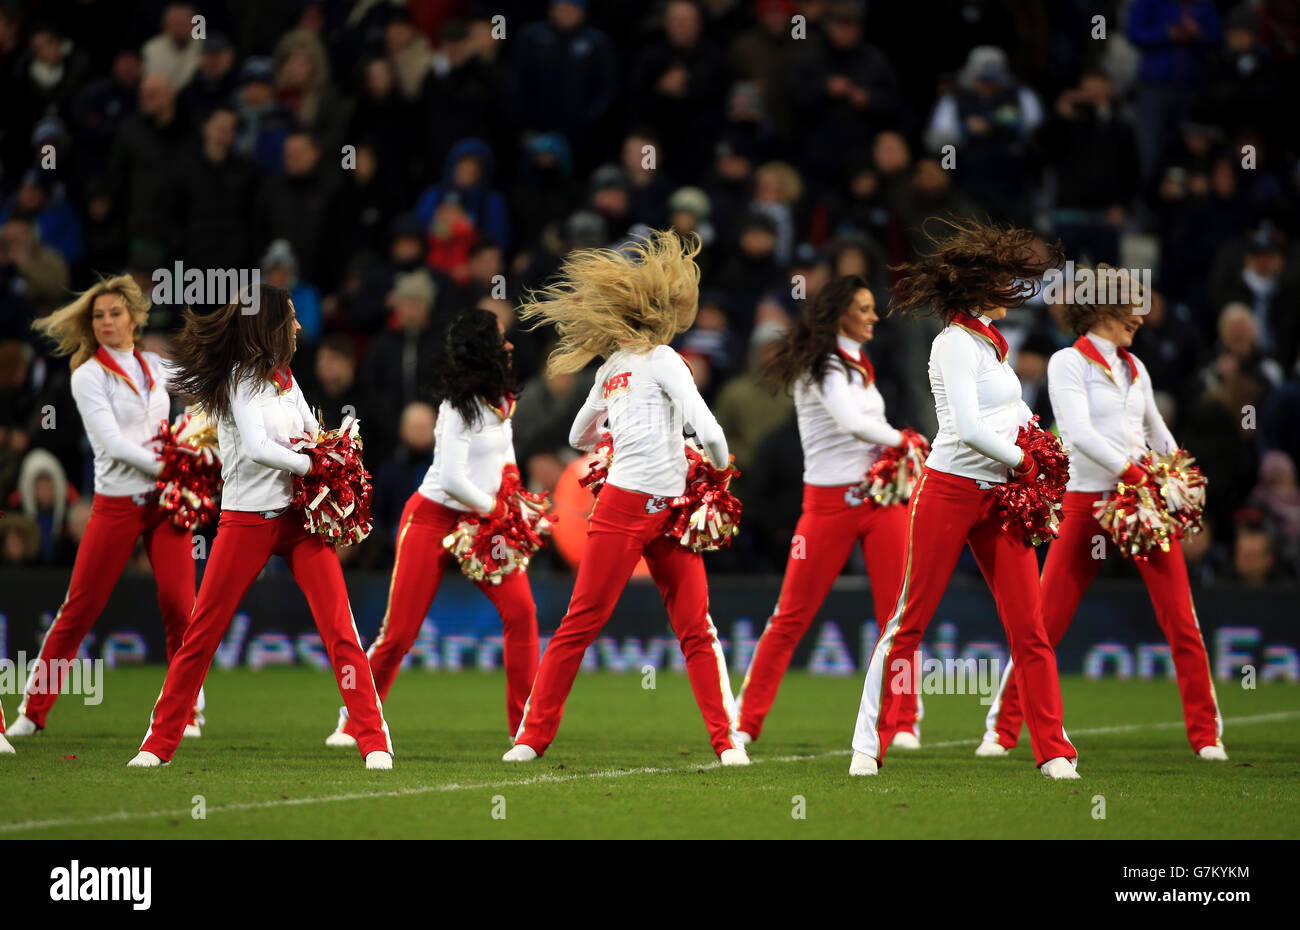 Kansas City Cheerleaders at halftime of the Barclays Premier League match at The Hawthornes, Birmingham. PRESS ASSOCIATION Photo. Picture date: Saturday January 31, 2015. See PA story SOCCER West Brom. Photo credit should read: Nick Potts/PA Wire. Stock Photo